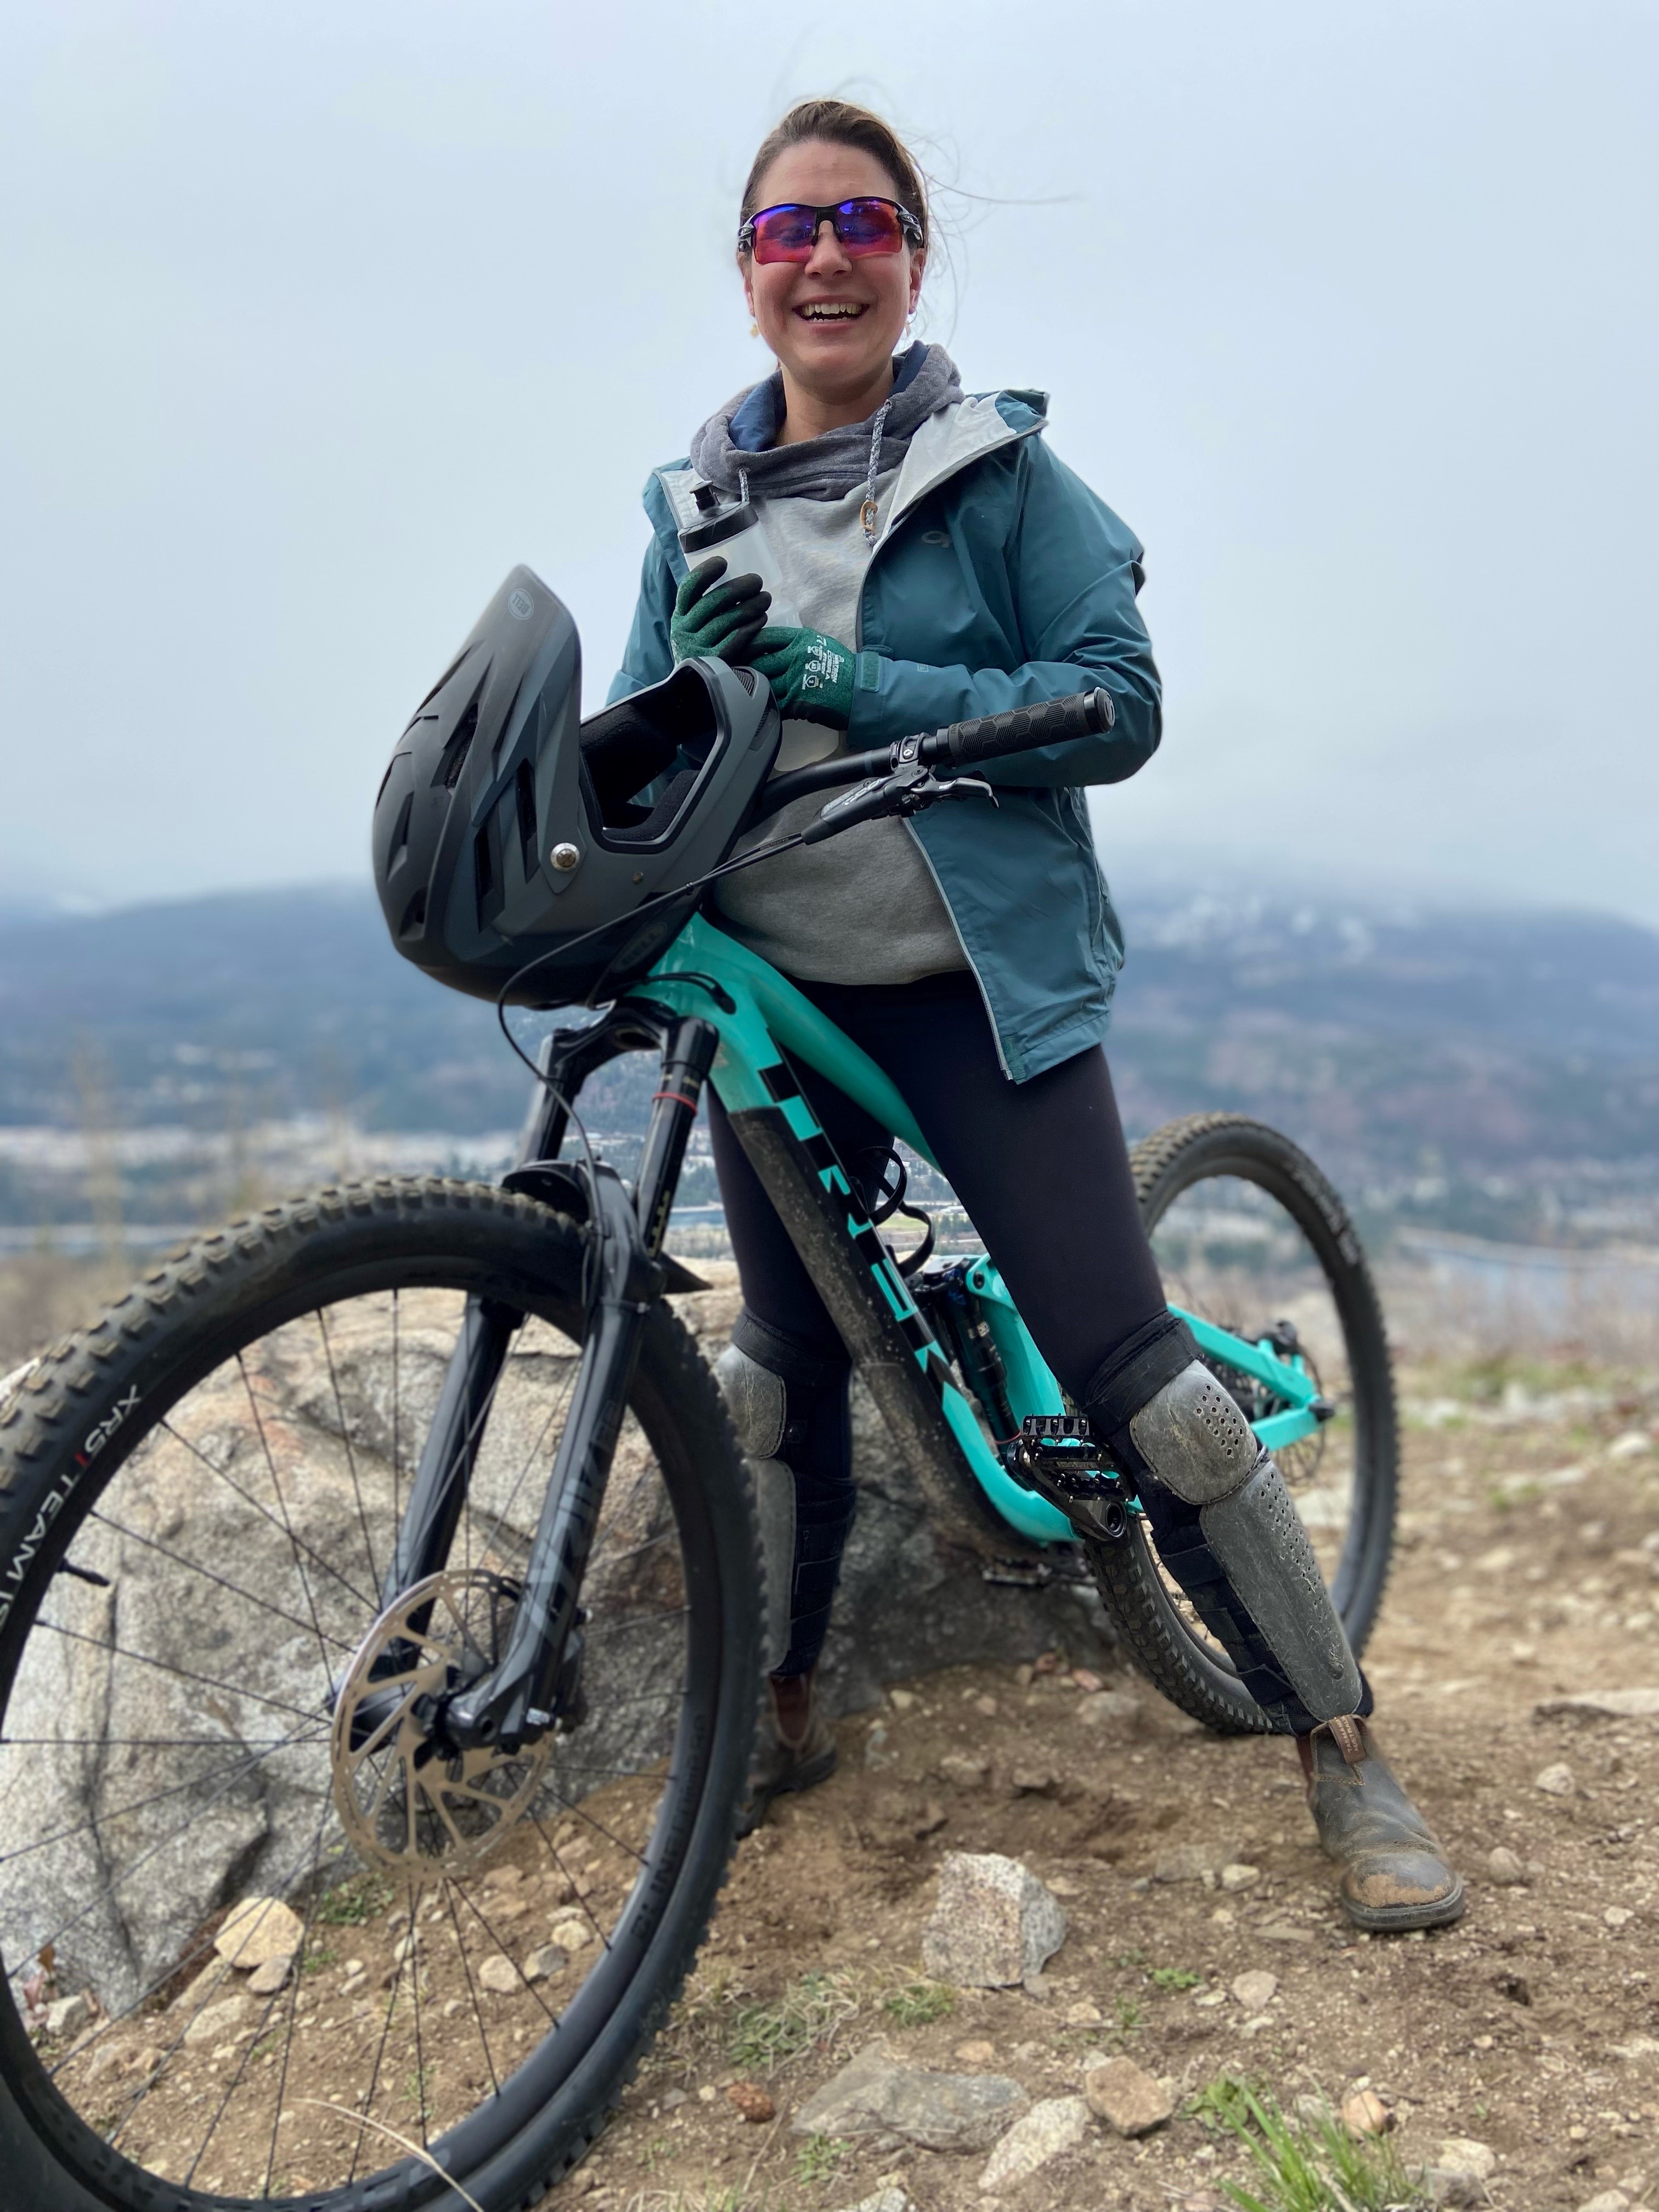 A woman in cycling gear sitting on a bike, with mountains in the background.